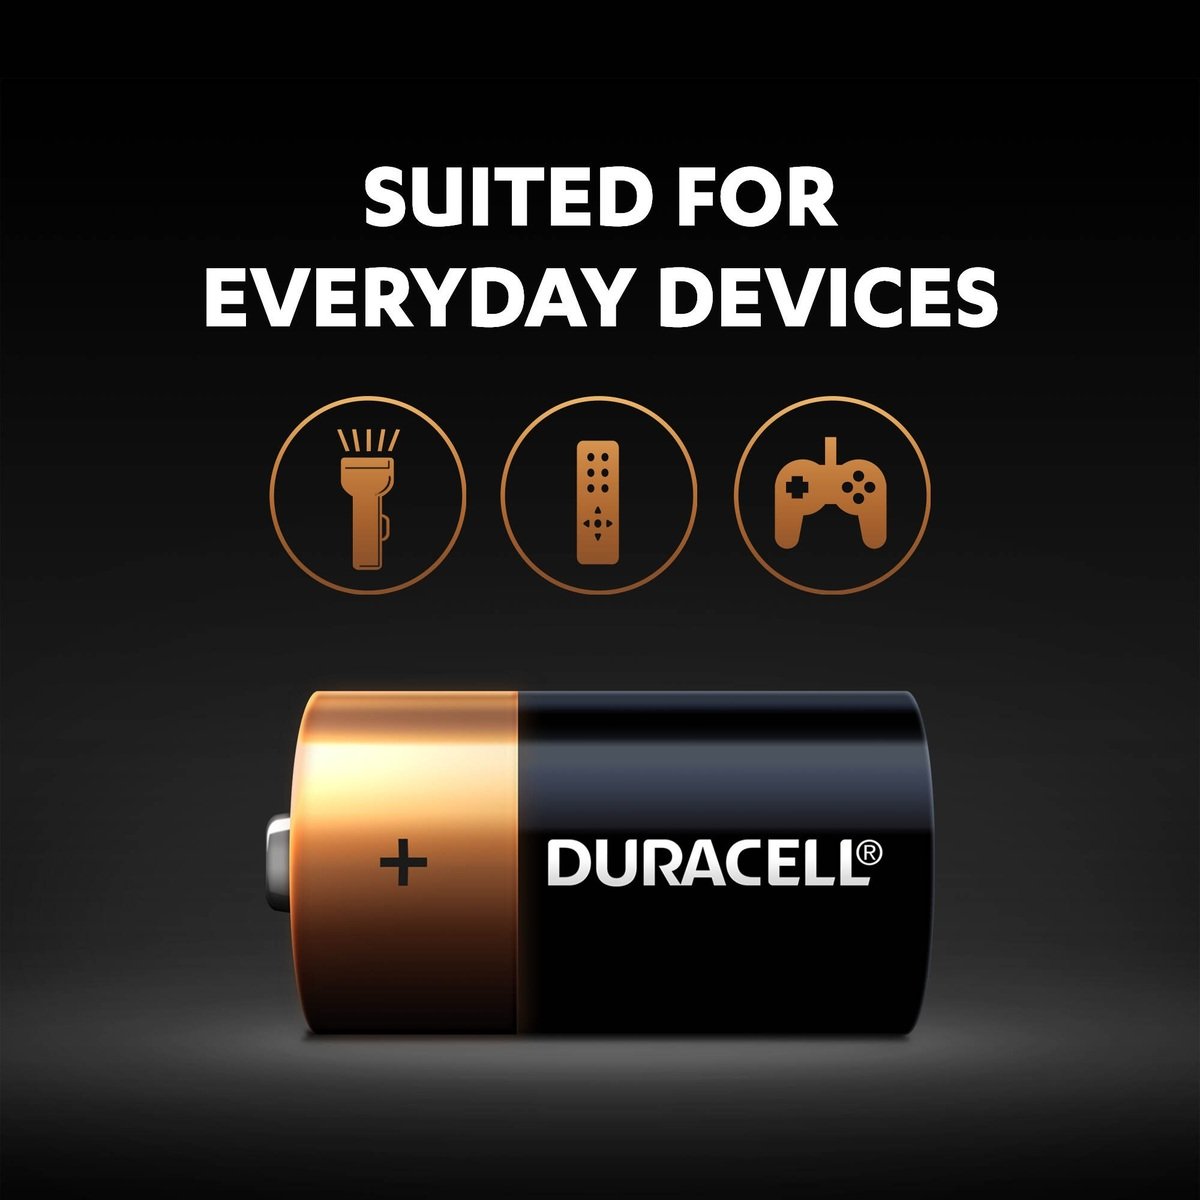 Duracell Type C Alkaline Batteries, pack of 2